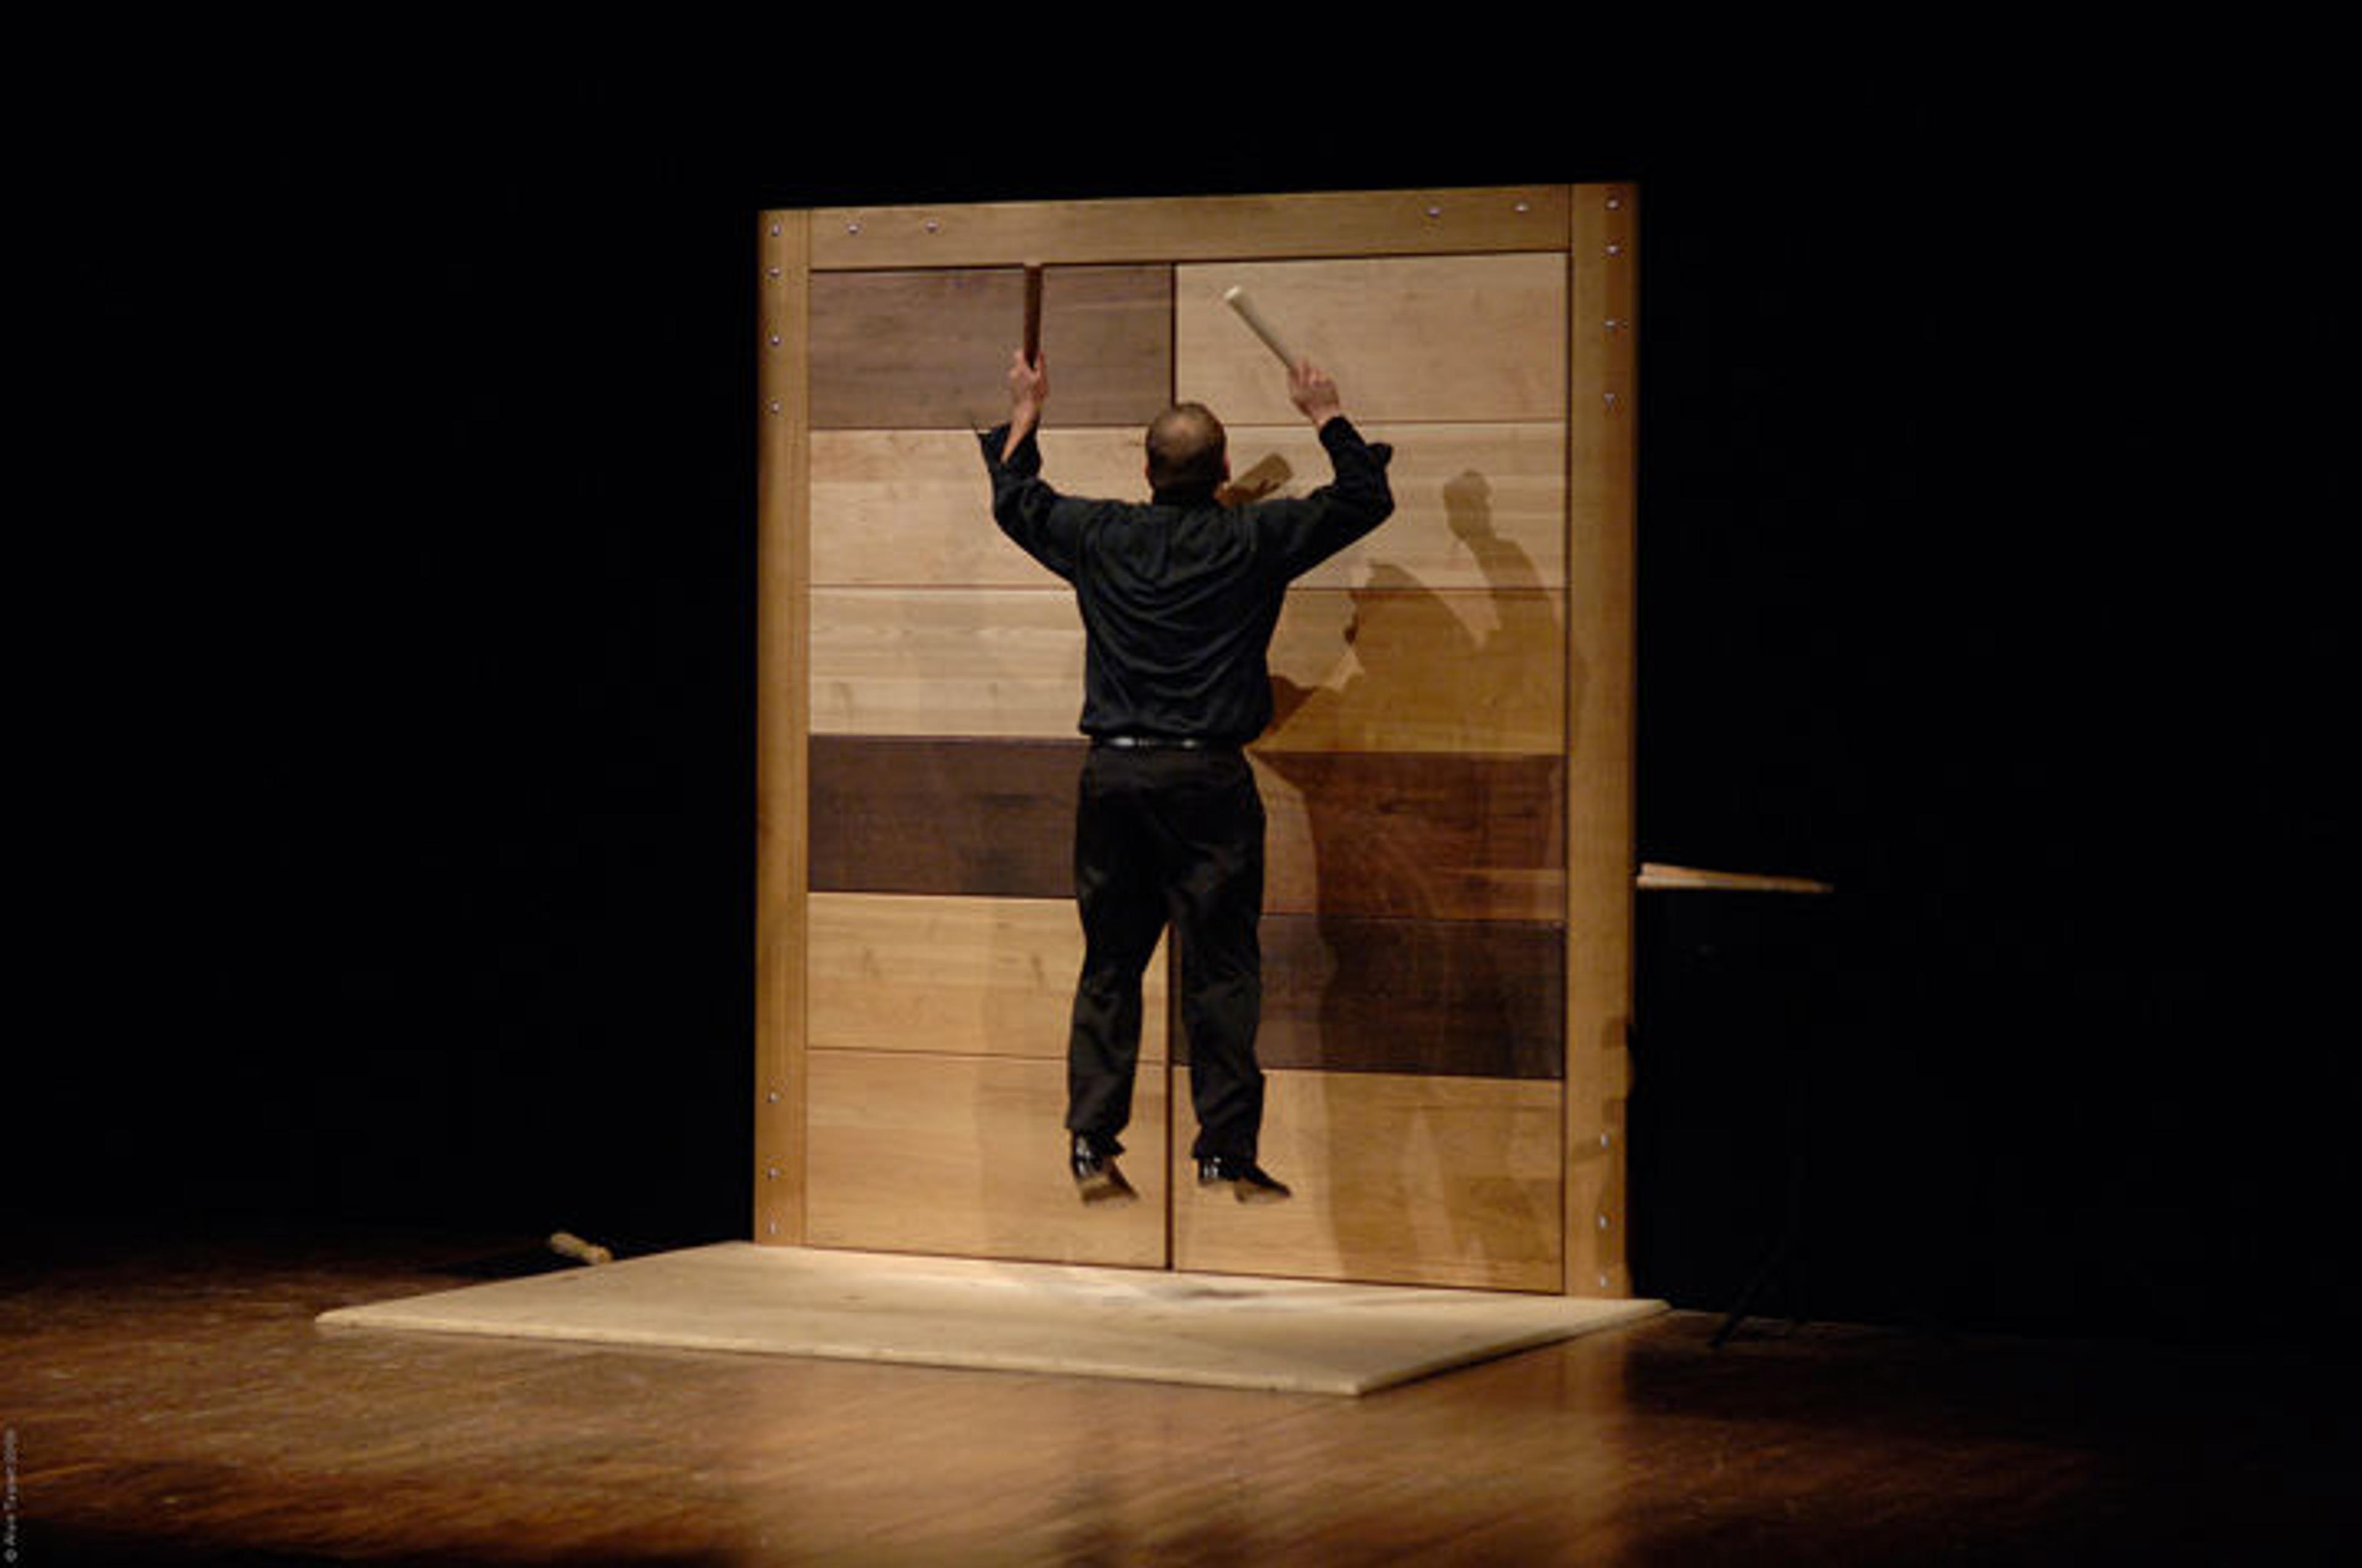 A percussionist jumps into the air to strike a large metal door with two hammers